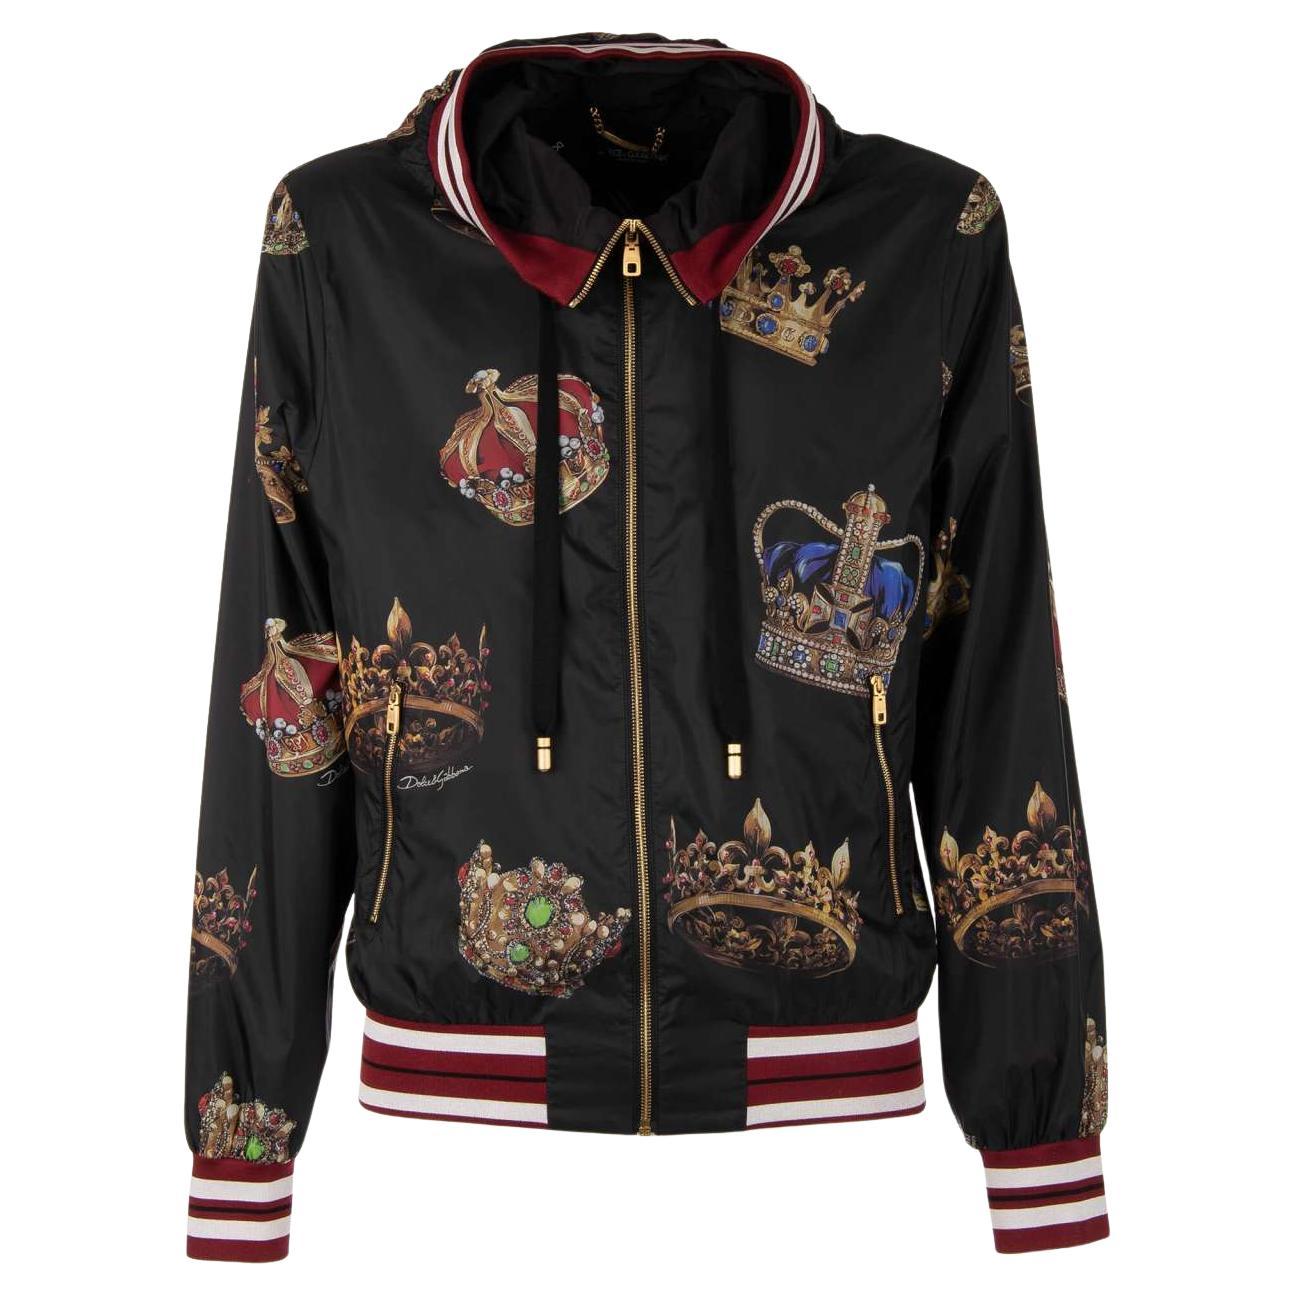 Dolce & Gabbana Crown Printed Bomber Jacket with Hoody and Pockets Black 48 M For Sale